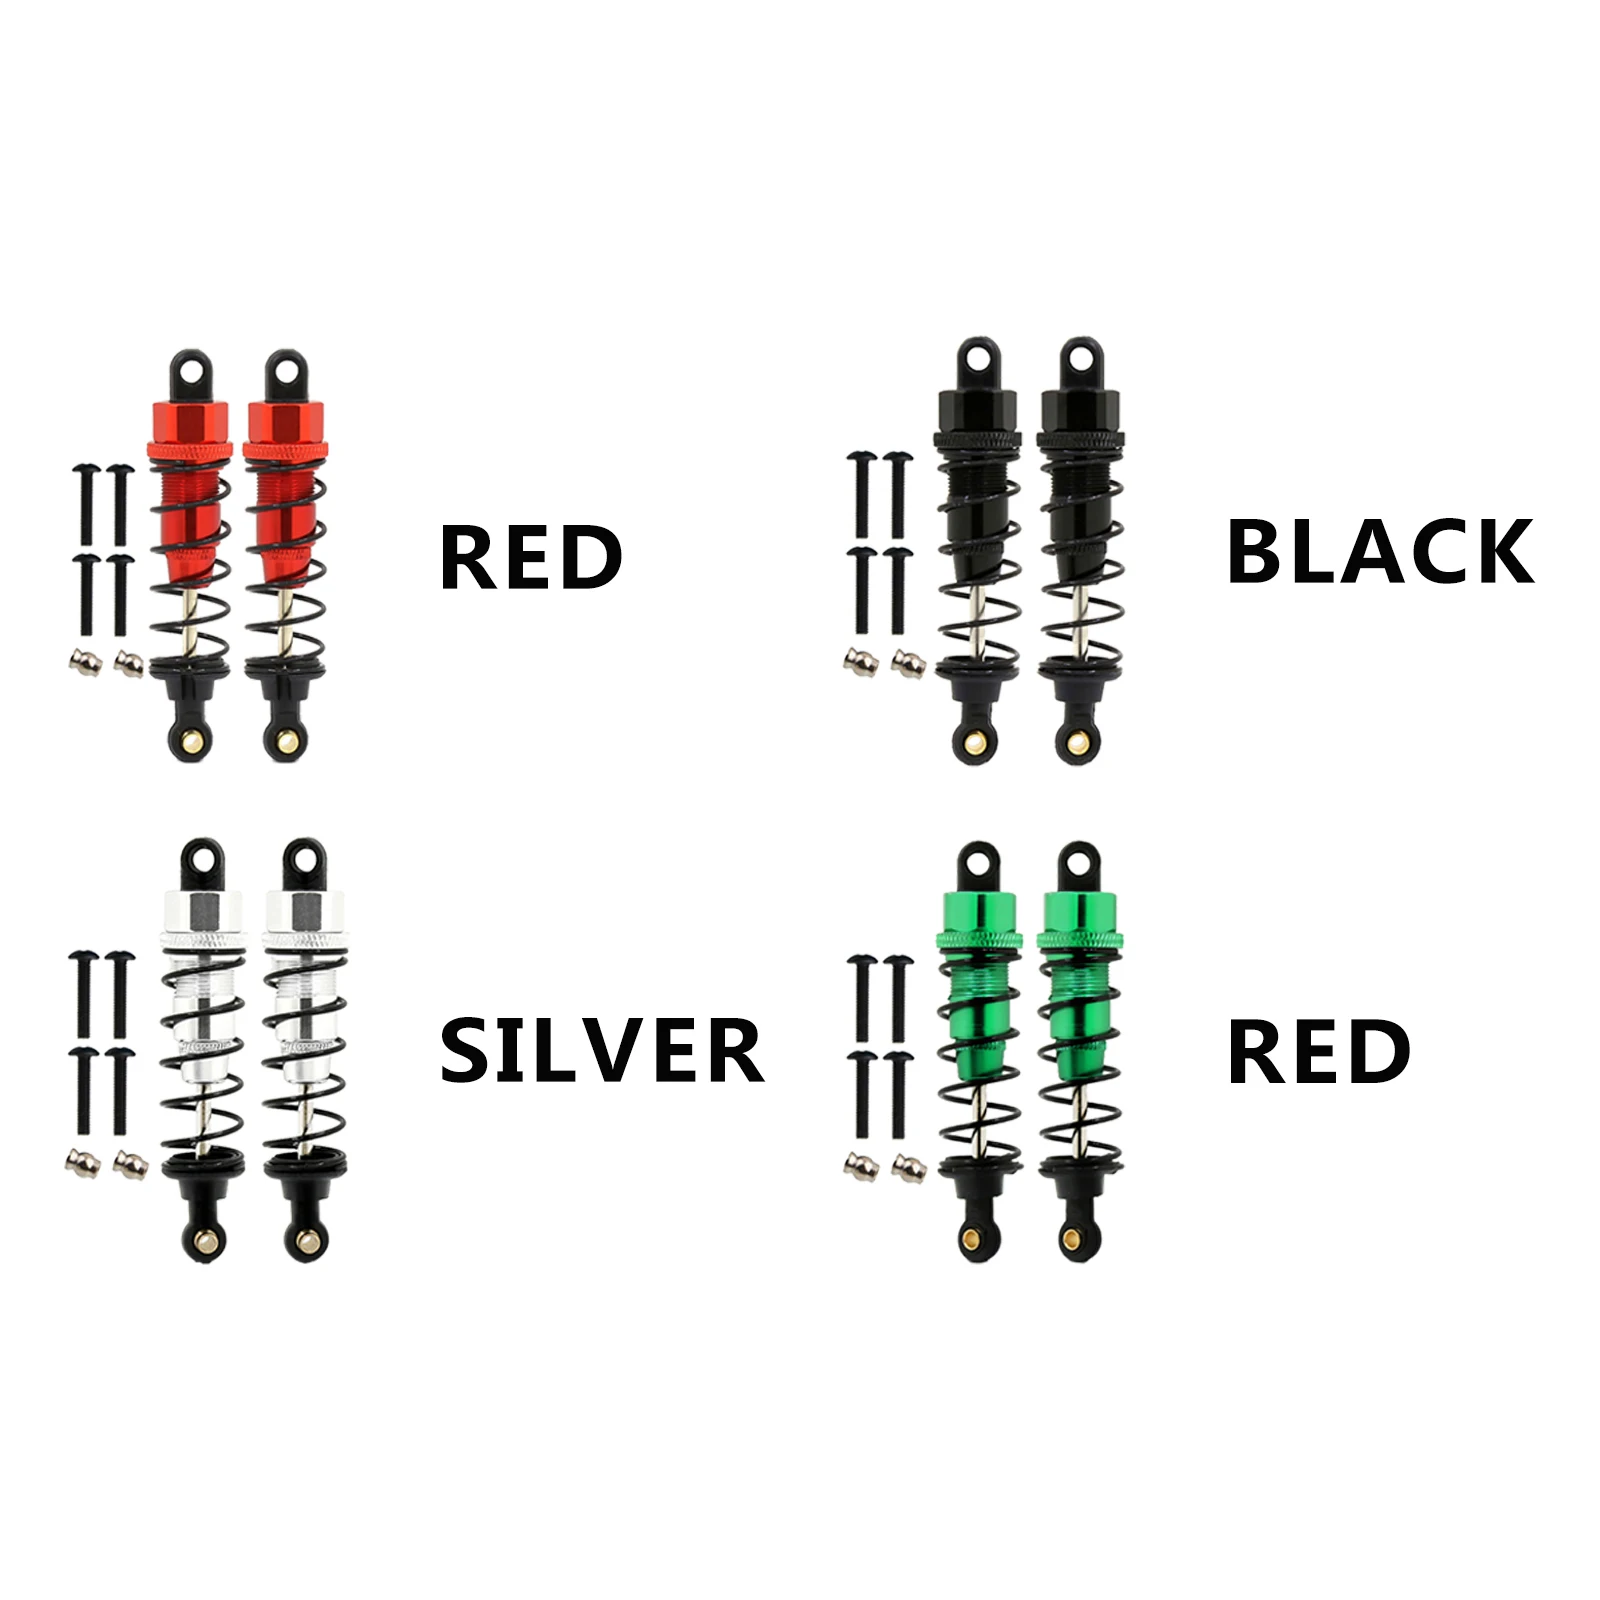 1Pairs Metal RC Car Shock Absorber Damper Adjustable Spare Parts for Tamiya CC01 RC Car Spare Parts Replacement Parts